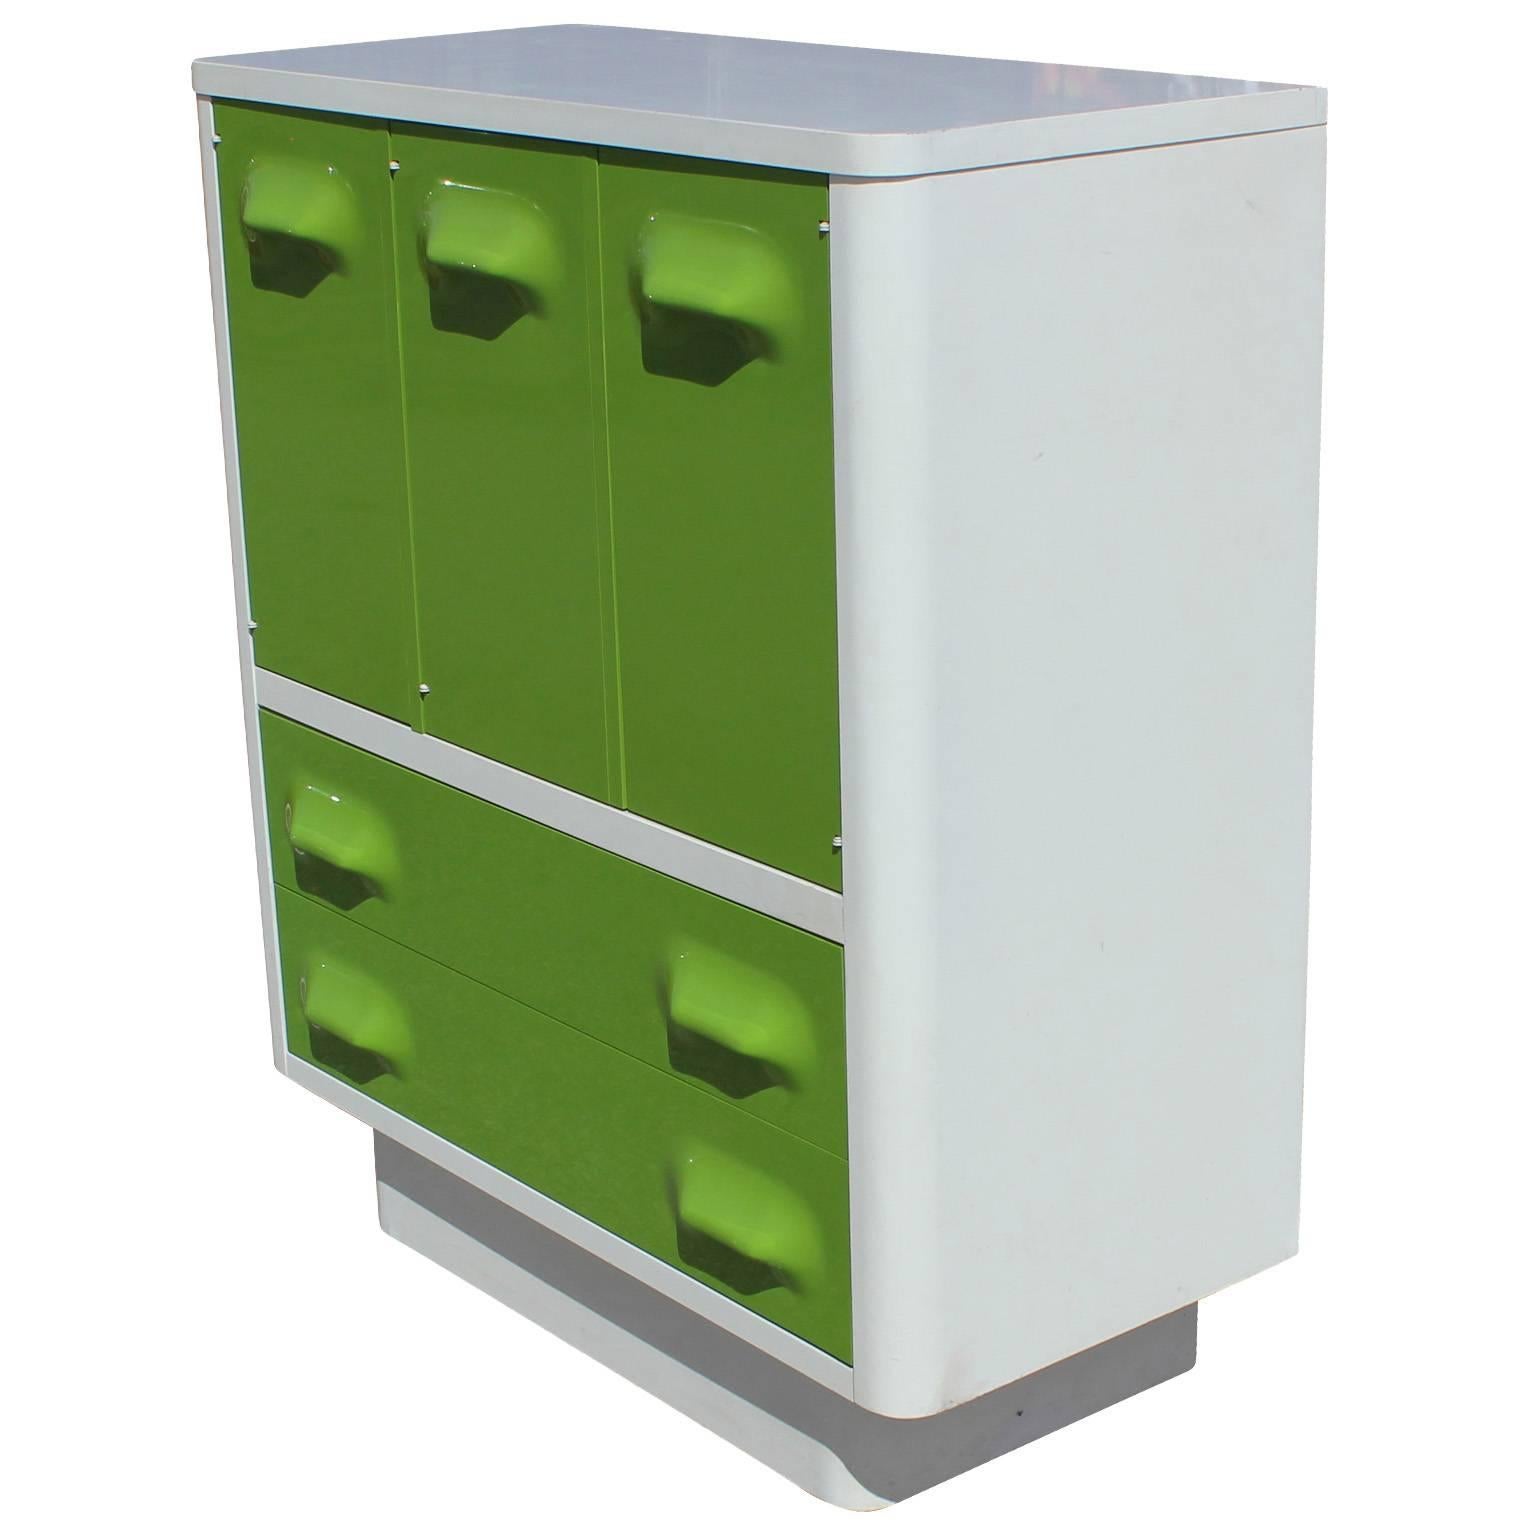 Chapter one Broyhill armoire or dresser in the style of Raymond Loewy's DF2000 line. Dresser is in white with lime green drawer fronts. Two large drawers. Left cabinet door opens to a single shelf. Middle and right door open to three pull out